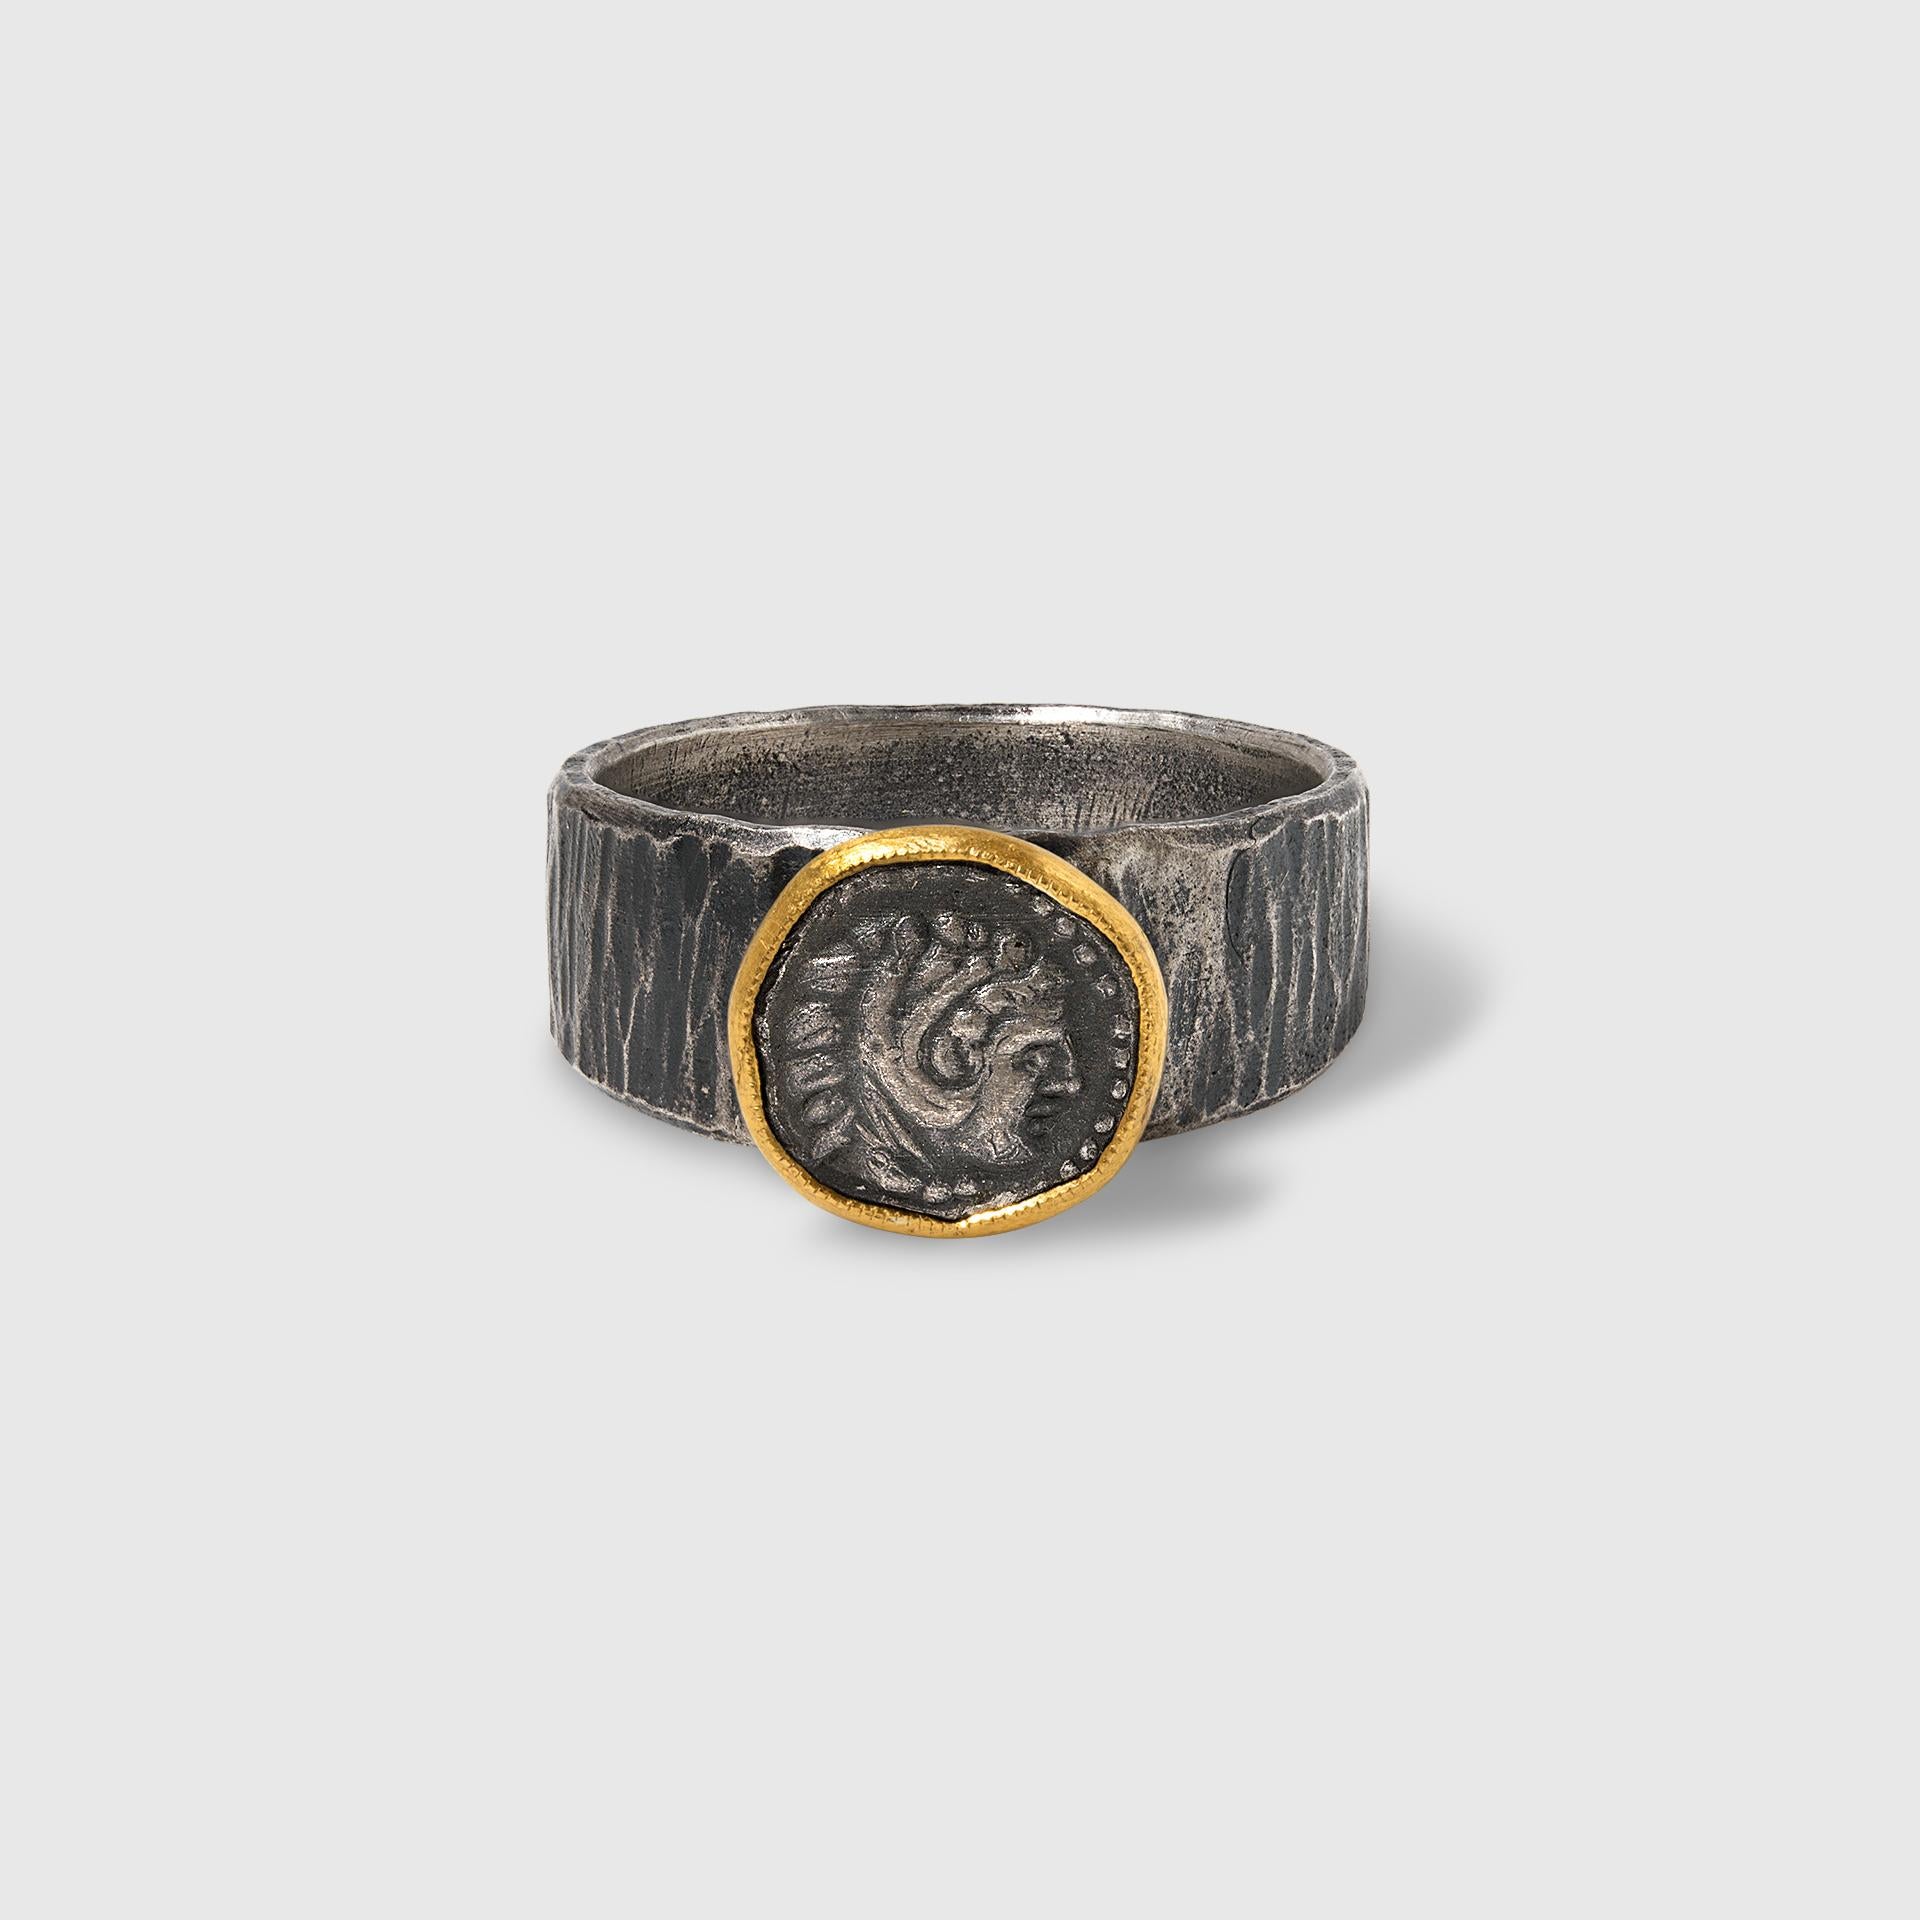 Greek Head, Alexander the Great, Miniature Coin 'Replica' Stacker Ring, 24K Gold and Silver, Handmade in Istanbul, Size 6 1/2 
Ring Details:
24K gold - 0.40 grams
Sterling Silver - 2.66 grams